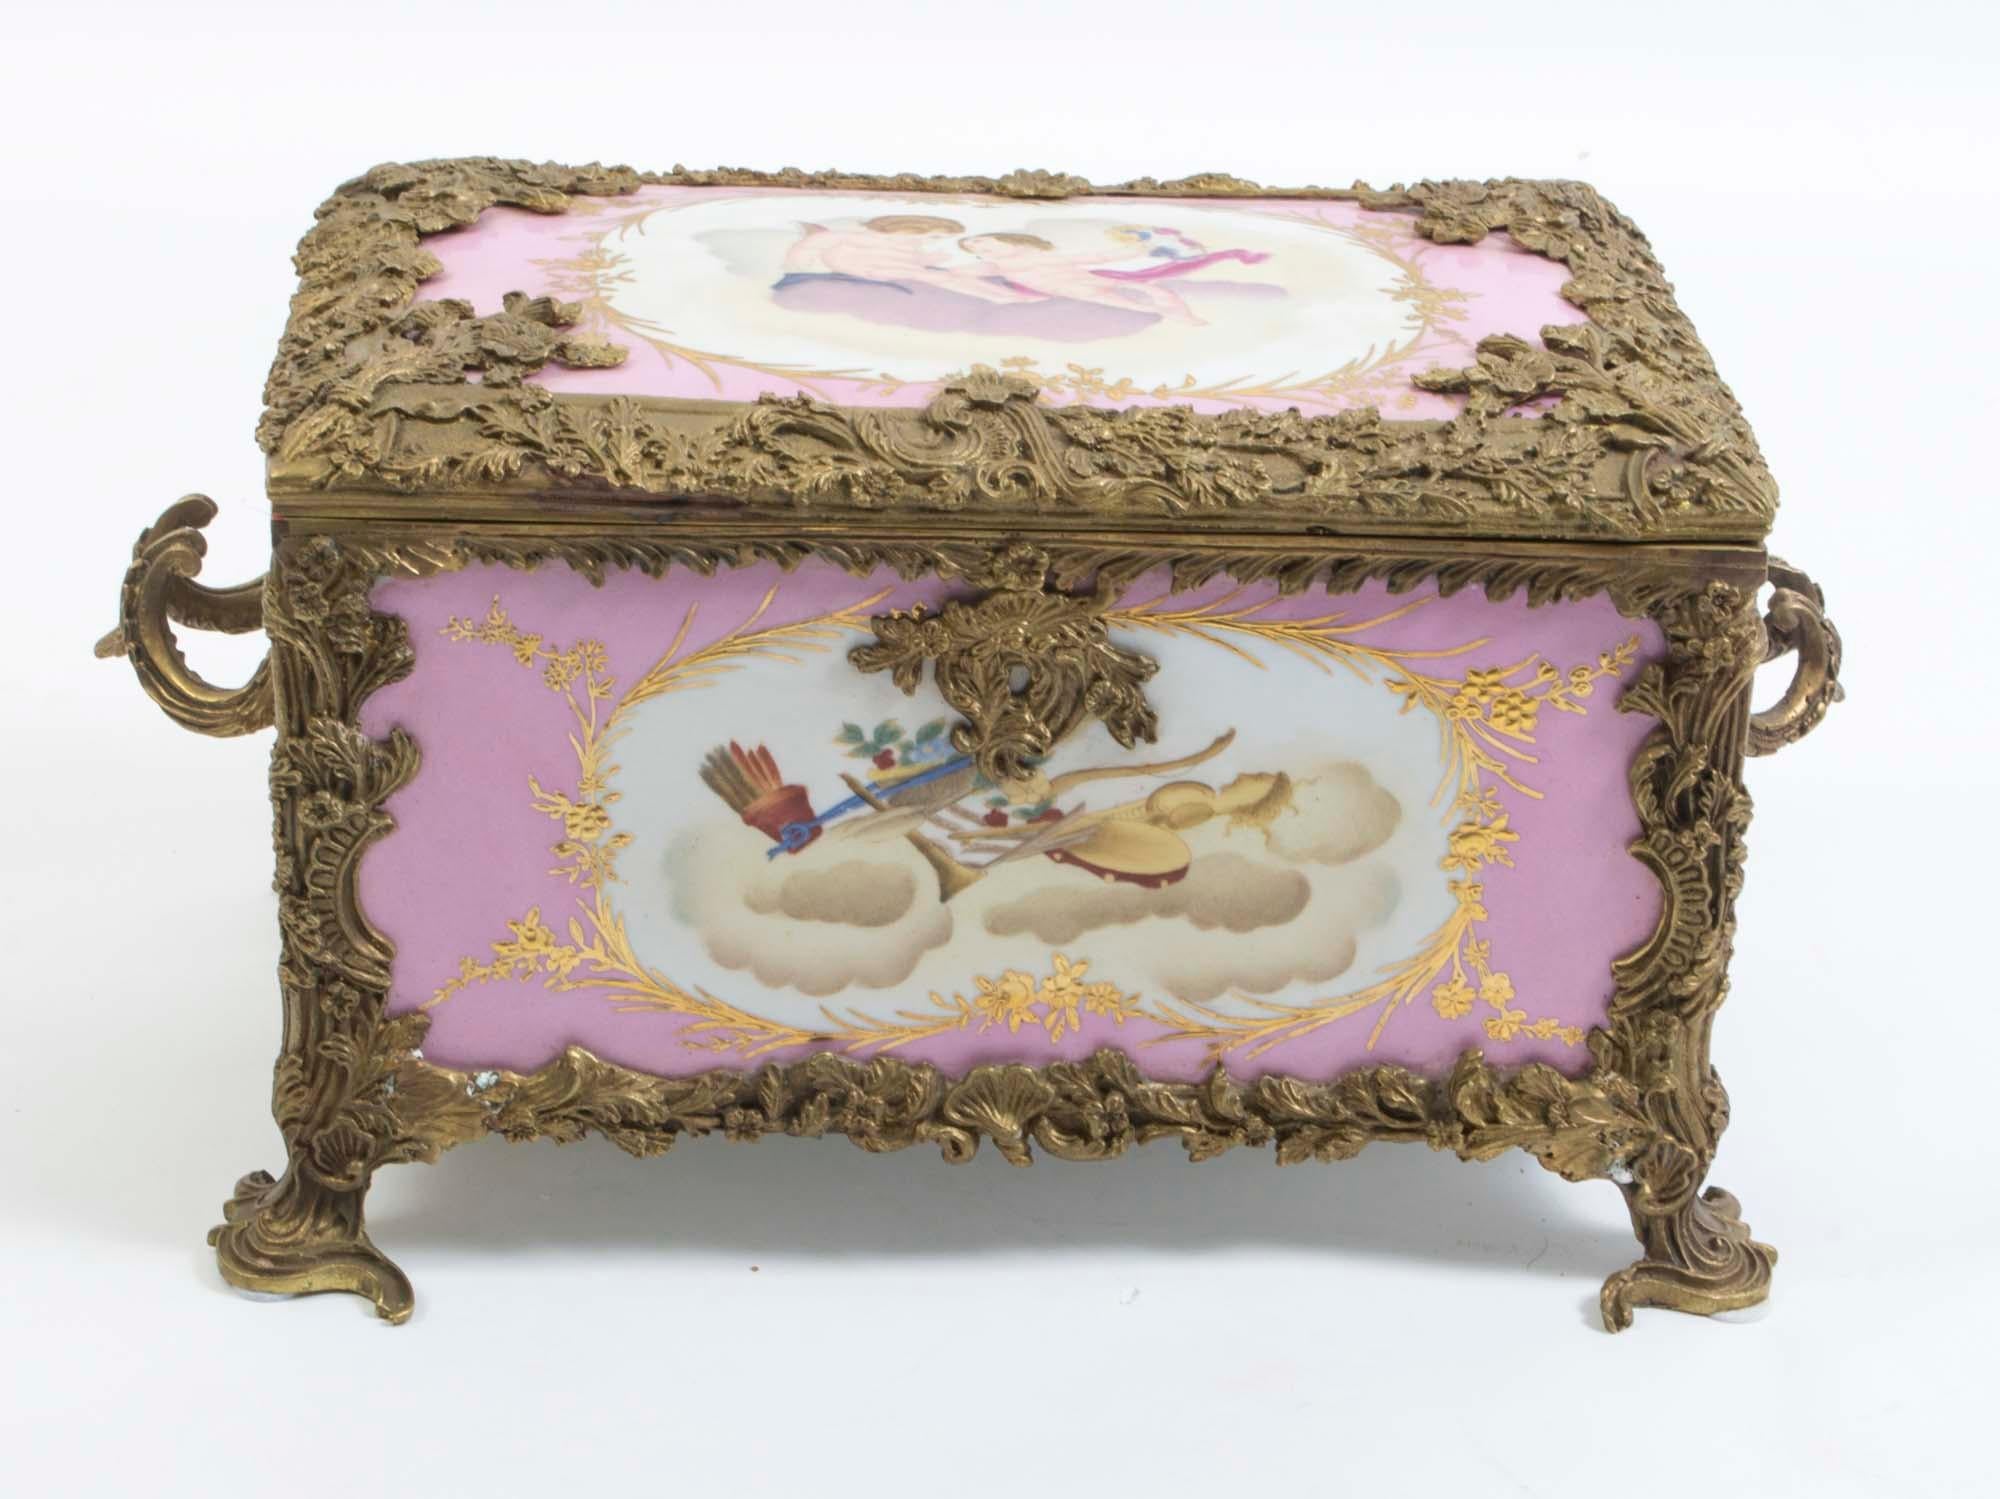 This is a beautiful large French Sevres style porcelain and ormolu-mounted jewelry casket in a powder pink, from the last quarter of the 20th century.

This highly decorative piece is hand painted with cherubs and musical instruments. It is